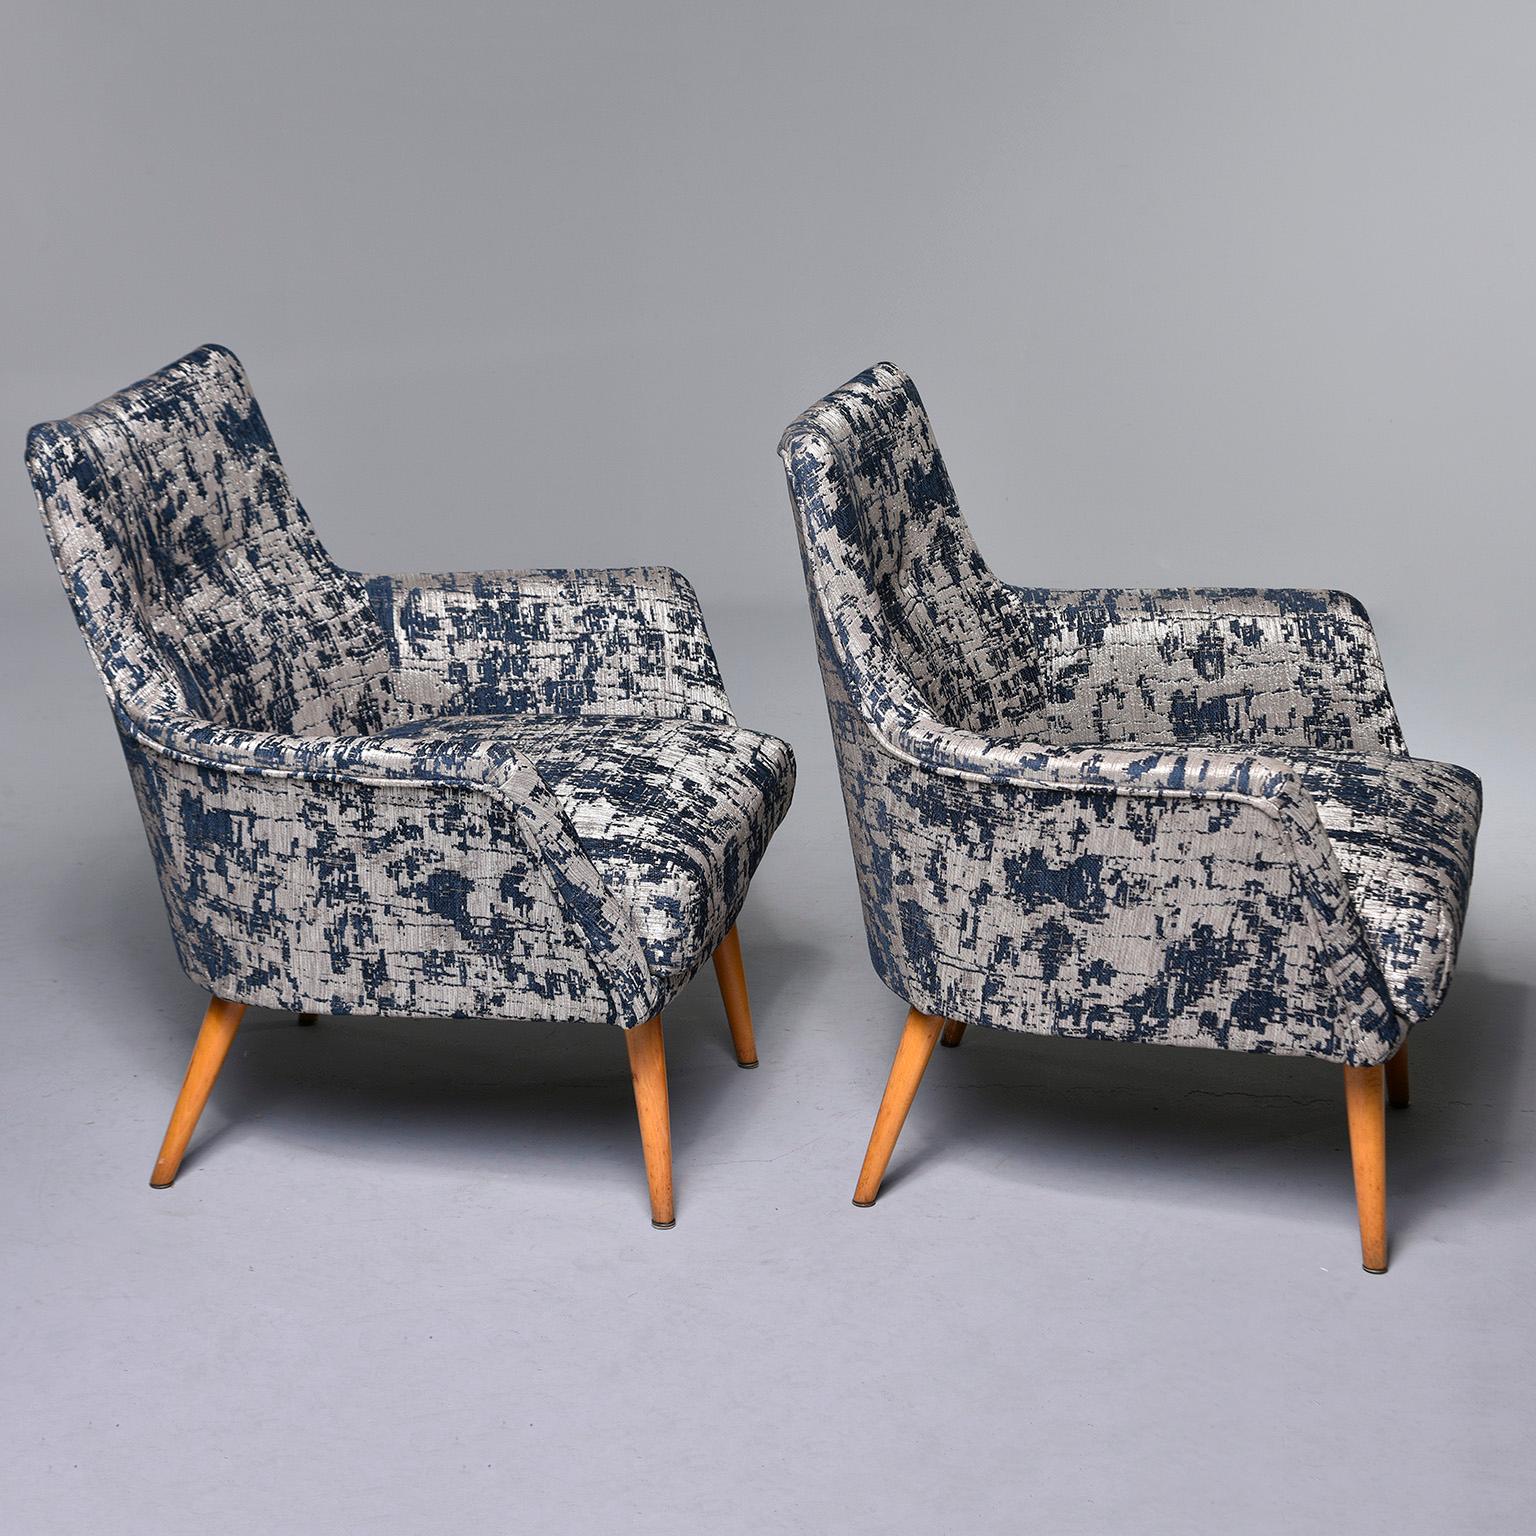 Pair of Italian Midcentury Armchairs with Blue and Silver Upholstery 1